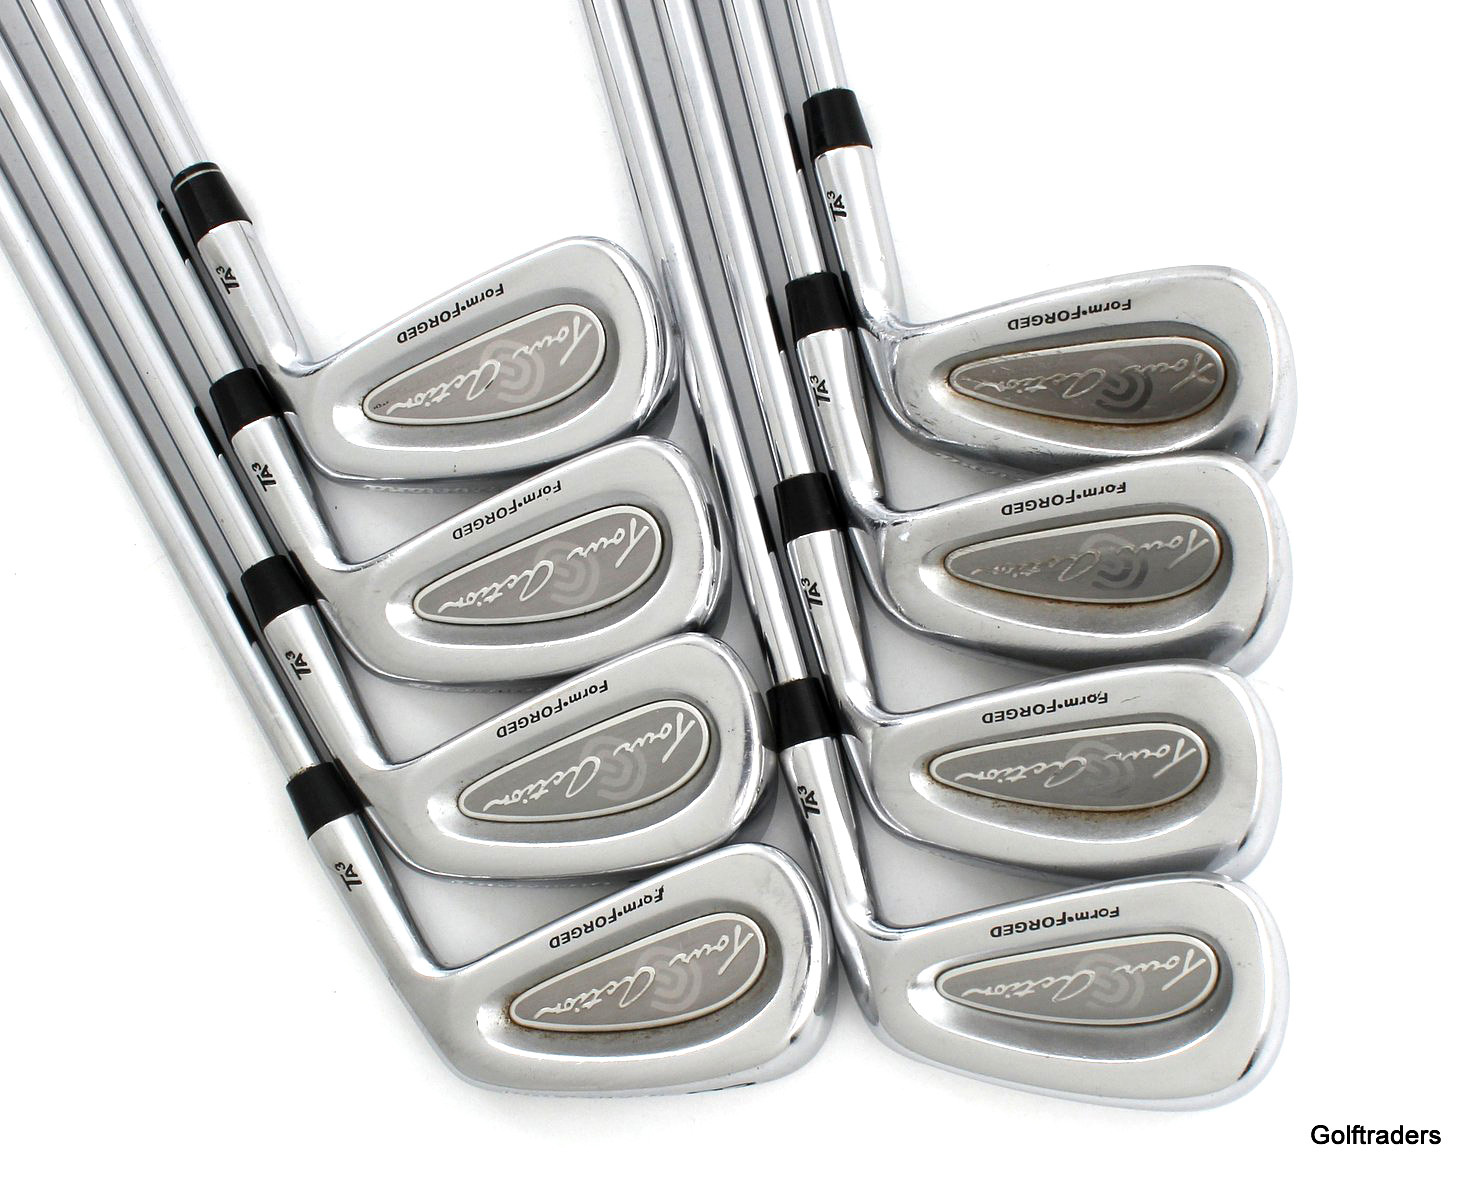 cleveland tour action irons blades